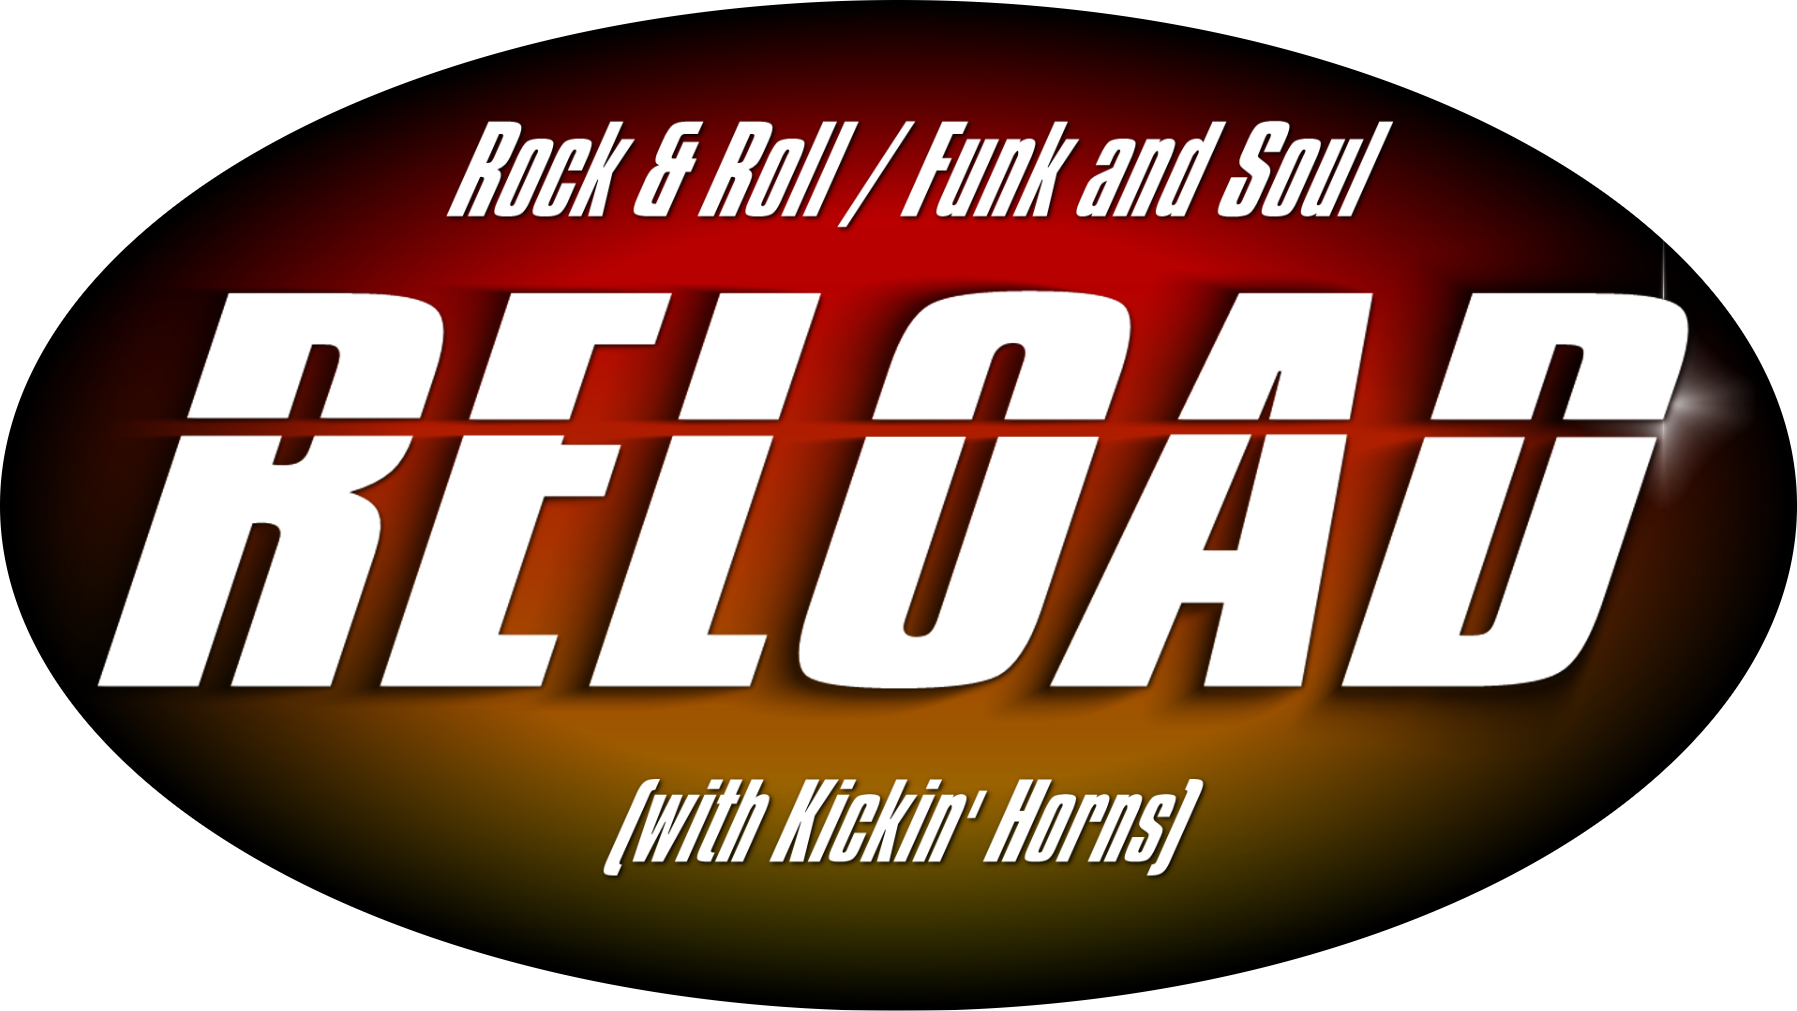 Reload - Rock and Roll / Funk and Soul with Kickin Horns